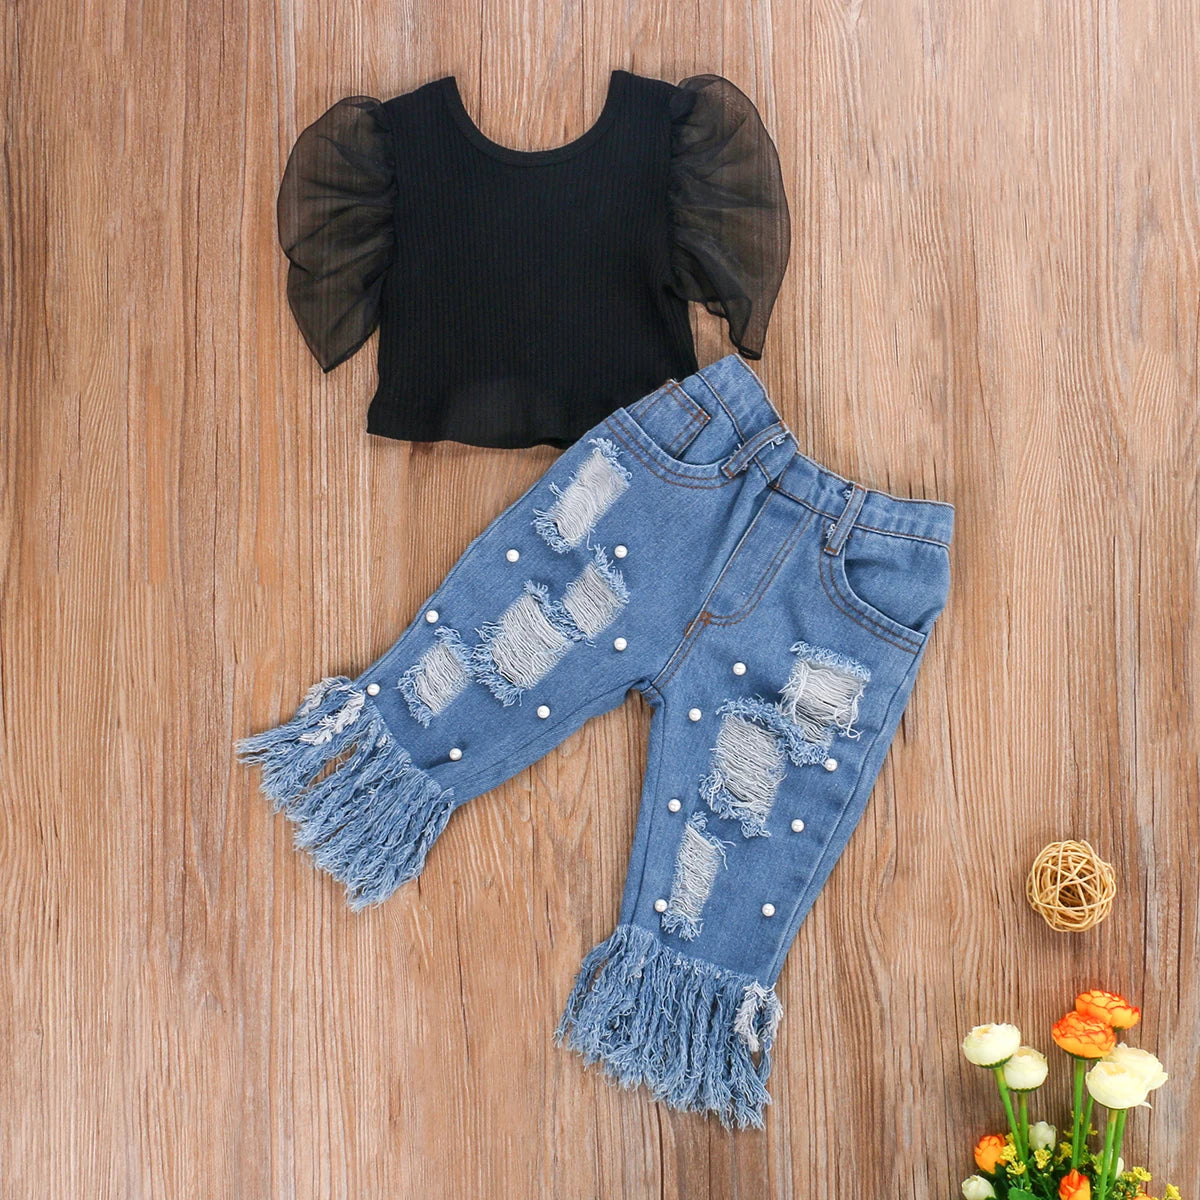 2020 Fashion Infant Baby Girls Clothes Sets 0-5Y Puff Sleeve Solid T Shirts Tops Pearl Blue Denim Pants